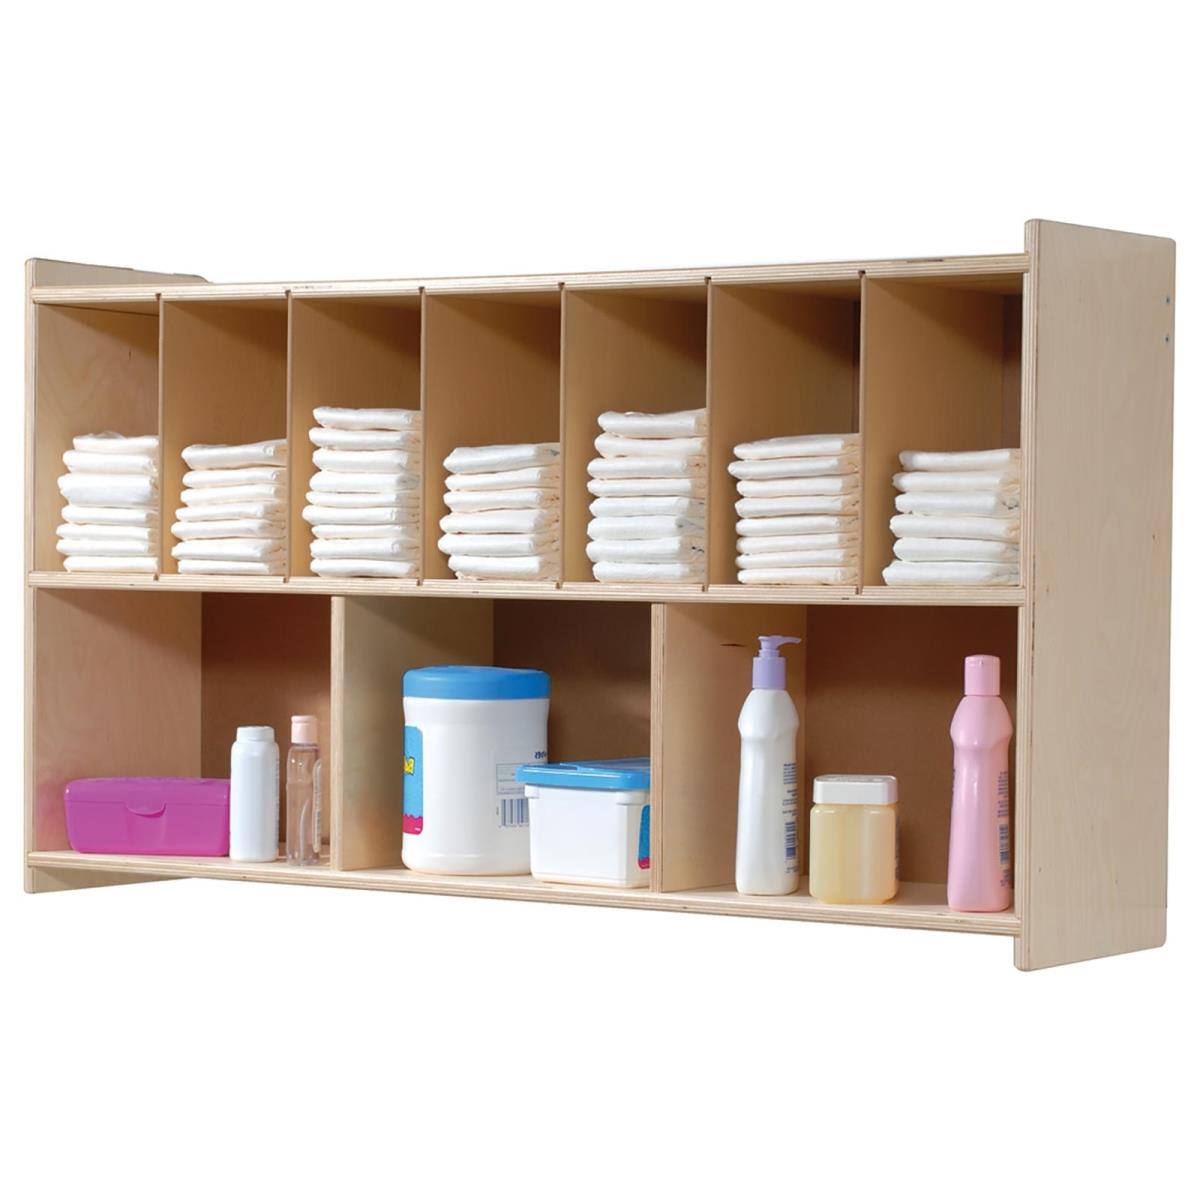 Angeles Ang1106 Diaper Wall Shelf - 24 X 10 X 41 In.